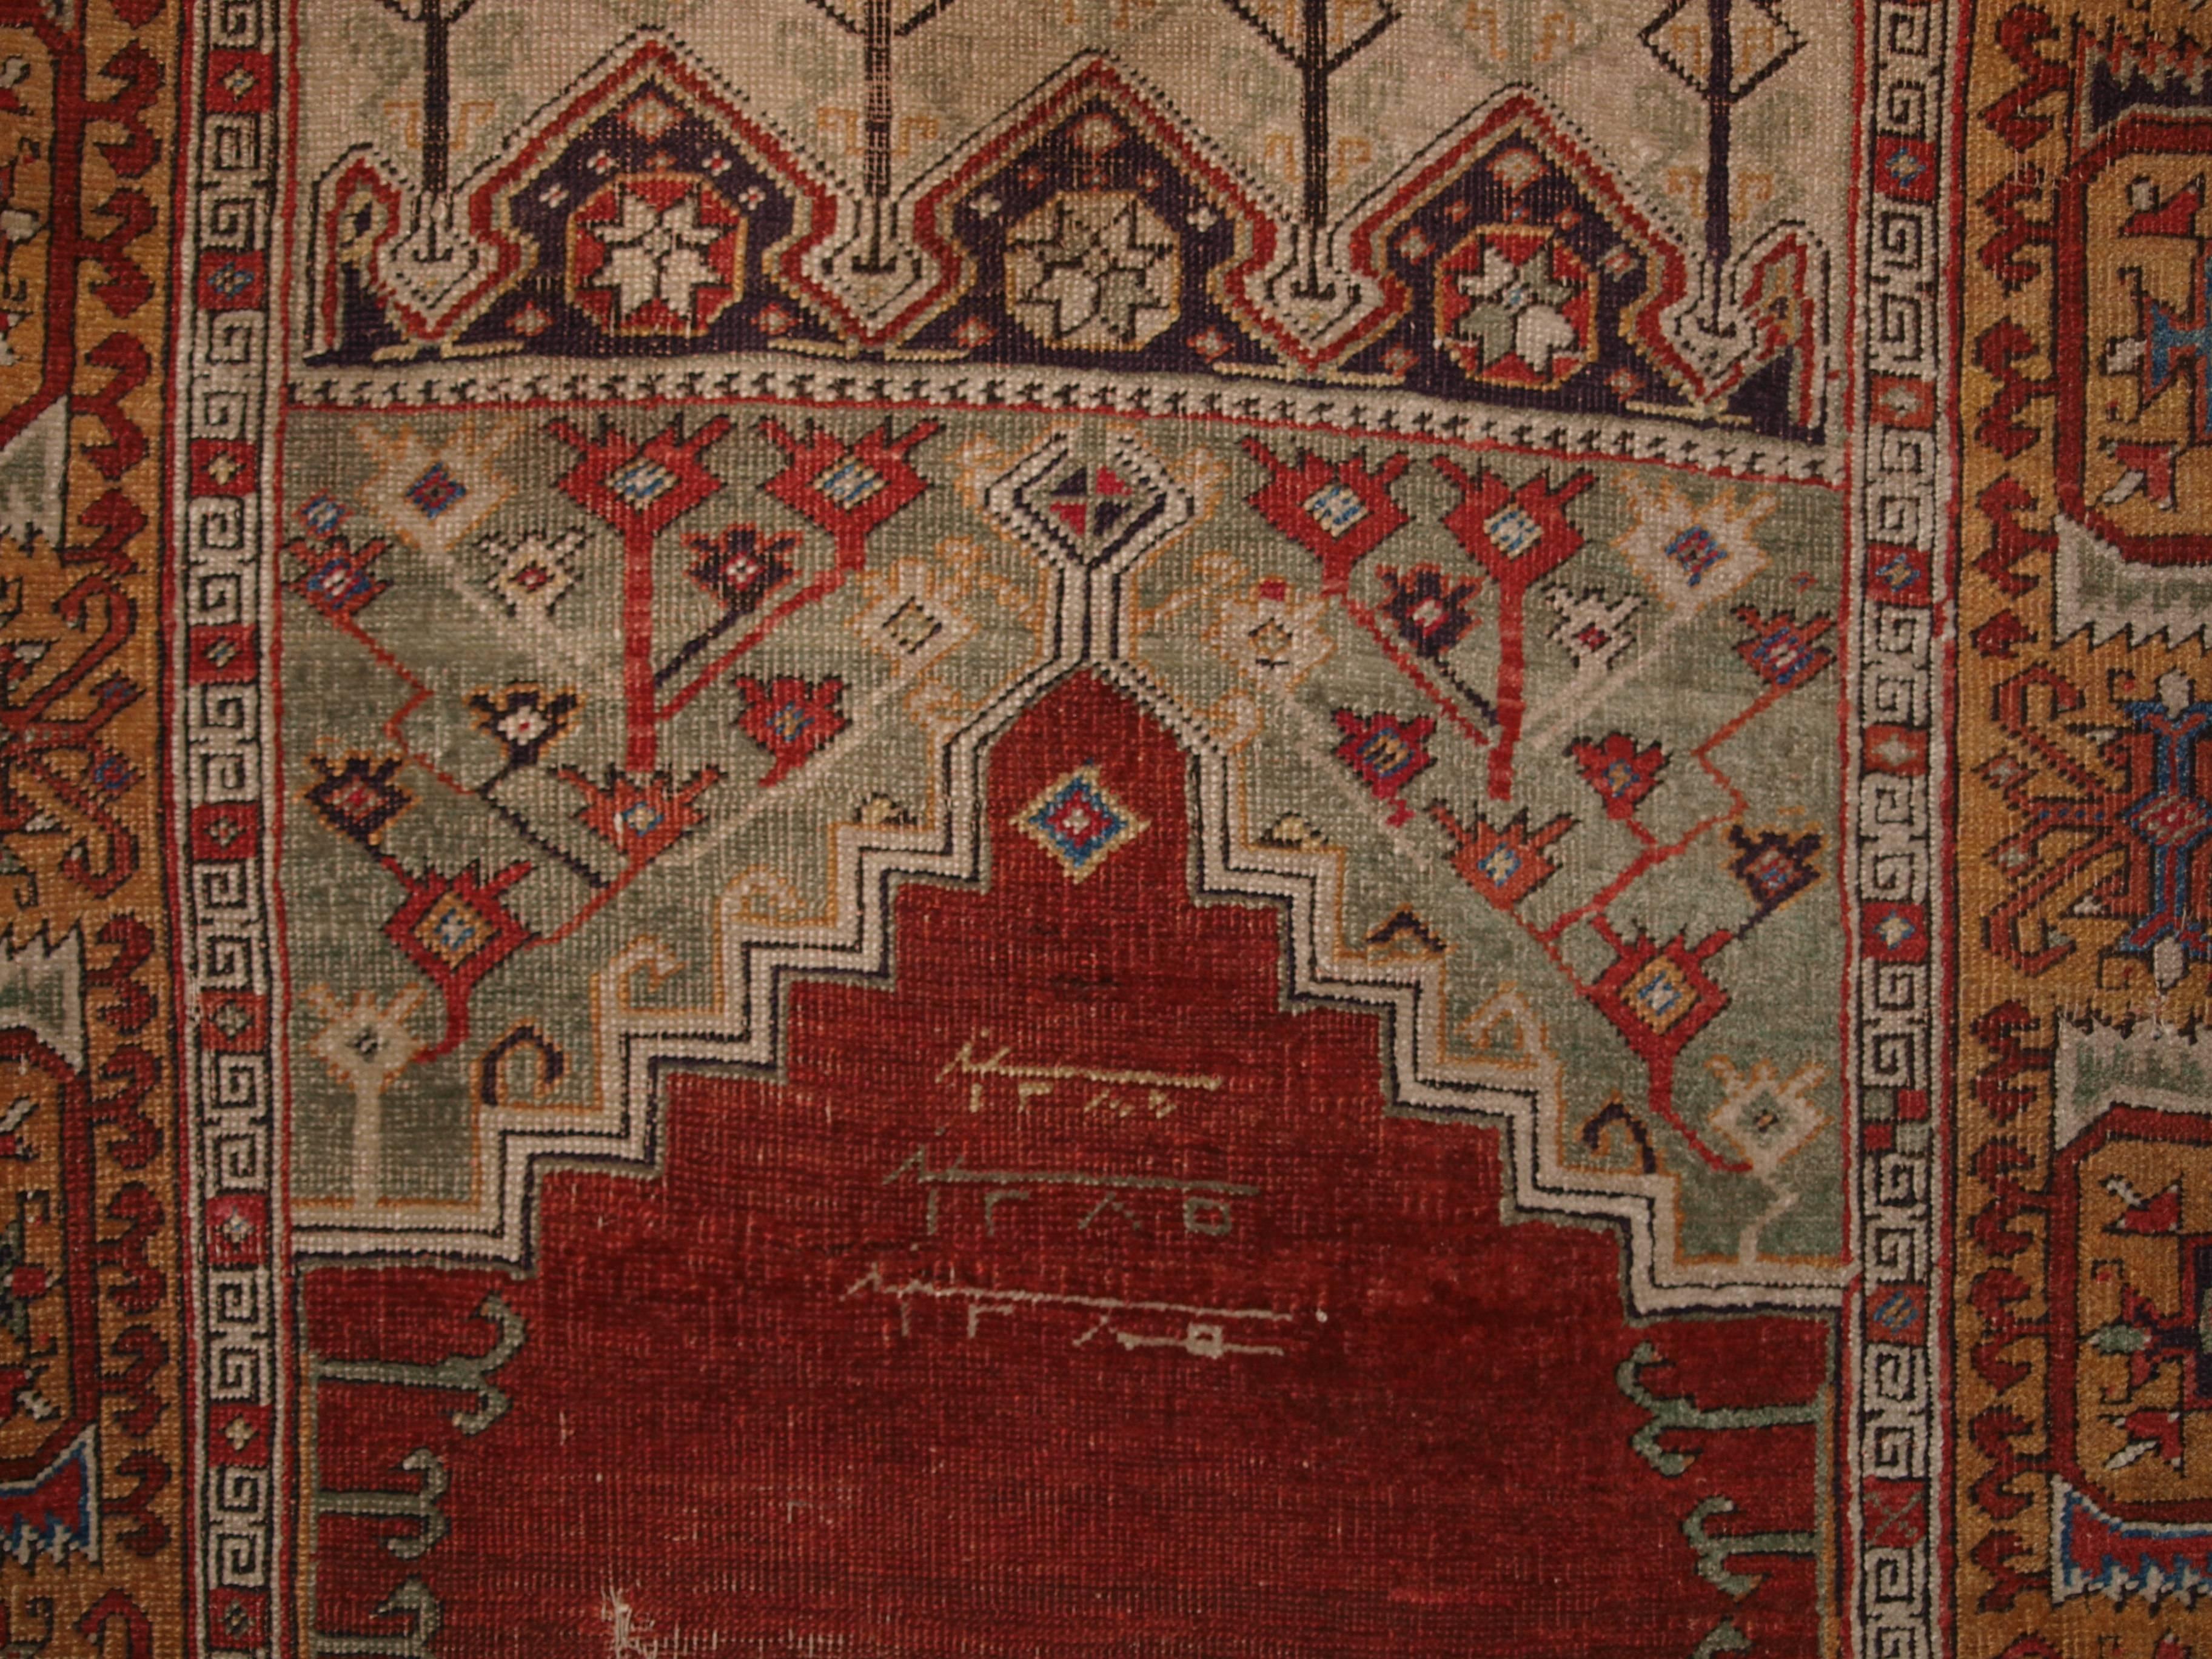 Antique Turkish Ladik prayer rug, dated three times 1285 (1868), superb early example.
Size: 5ft 5in x 4ft 2in (165 x 126cm).

Antique Turkish Ladik prayer rug, a superb early dated example in original condition.

Dated 1285 (1868).

This is